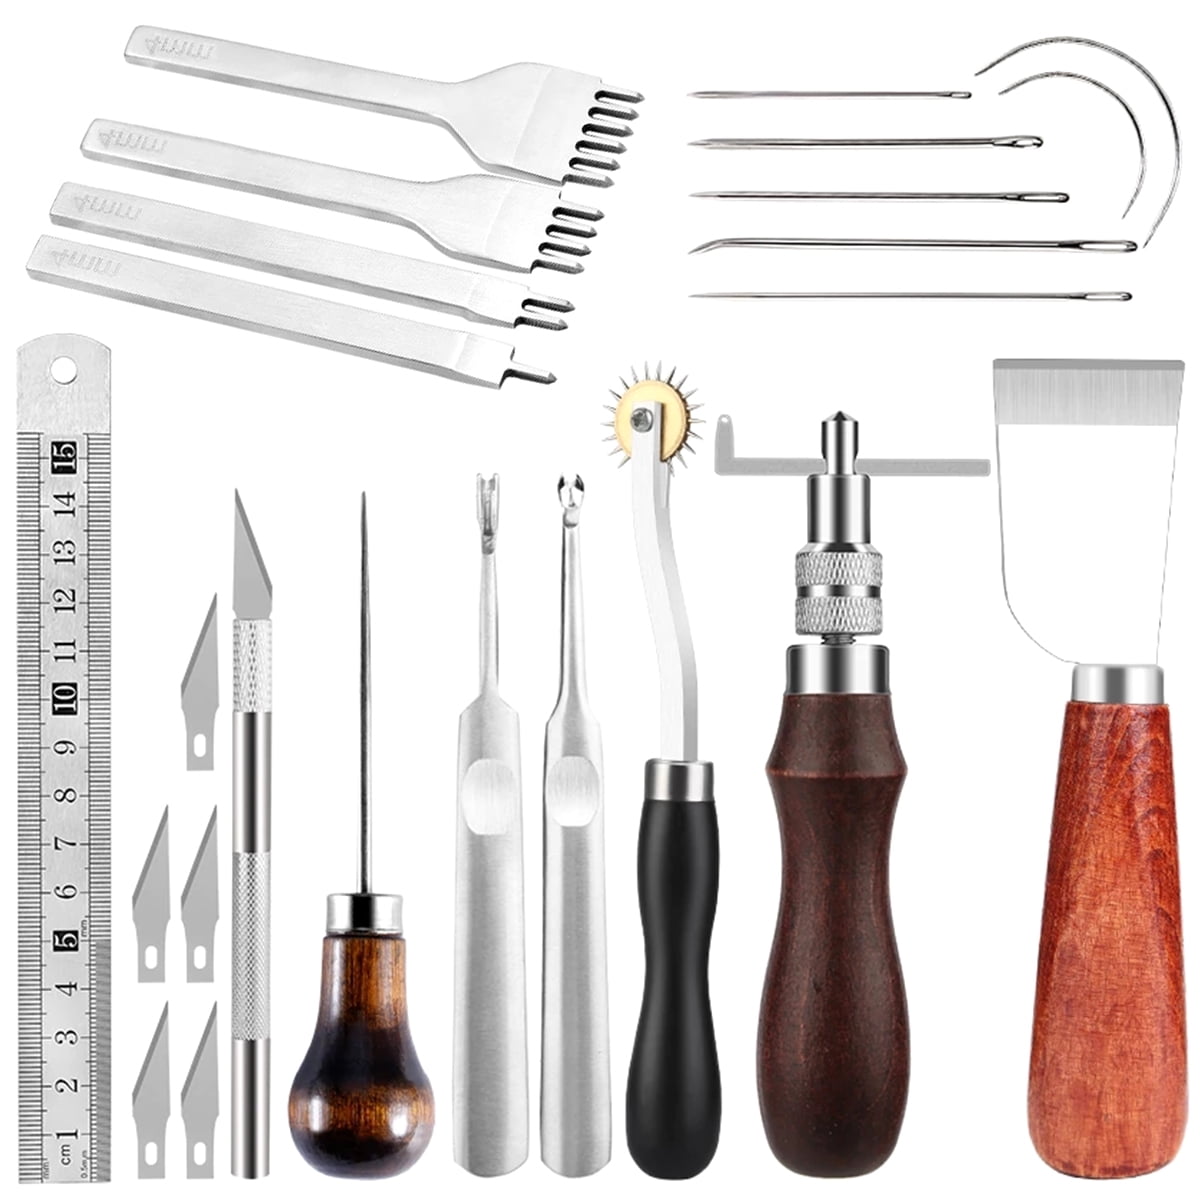 with needles and other tools for 12 pieces Leather working tool kit 